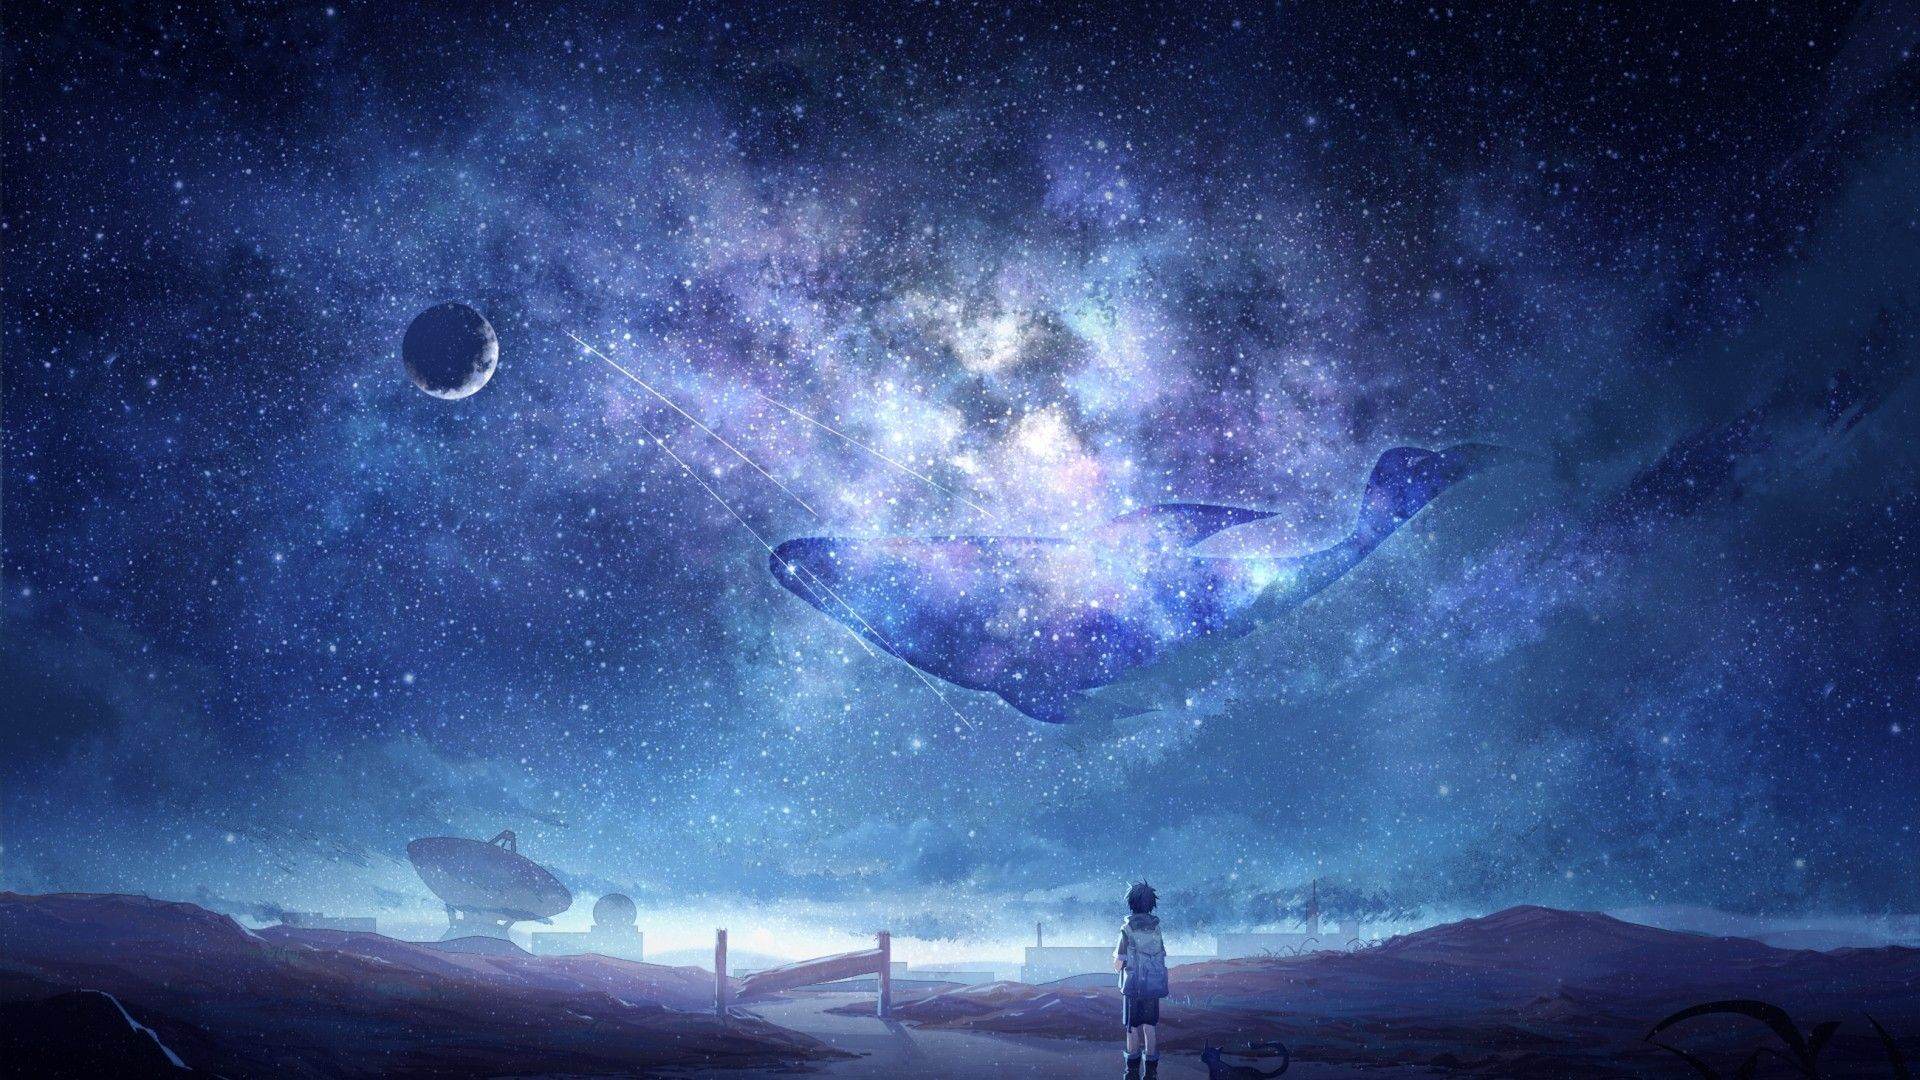 Download 1920x1080 Anime Sky, Milky Way, Stars, Anime Boy, Dog, Moon, Whale, Galaxy Wallpaper for Widescreen